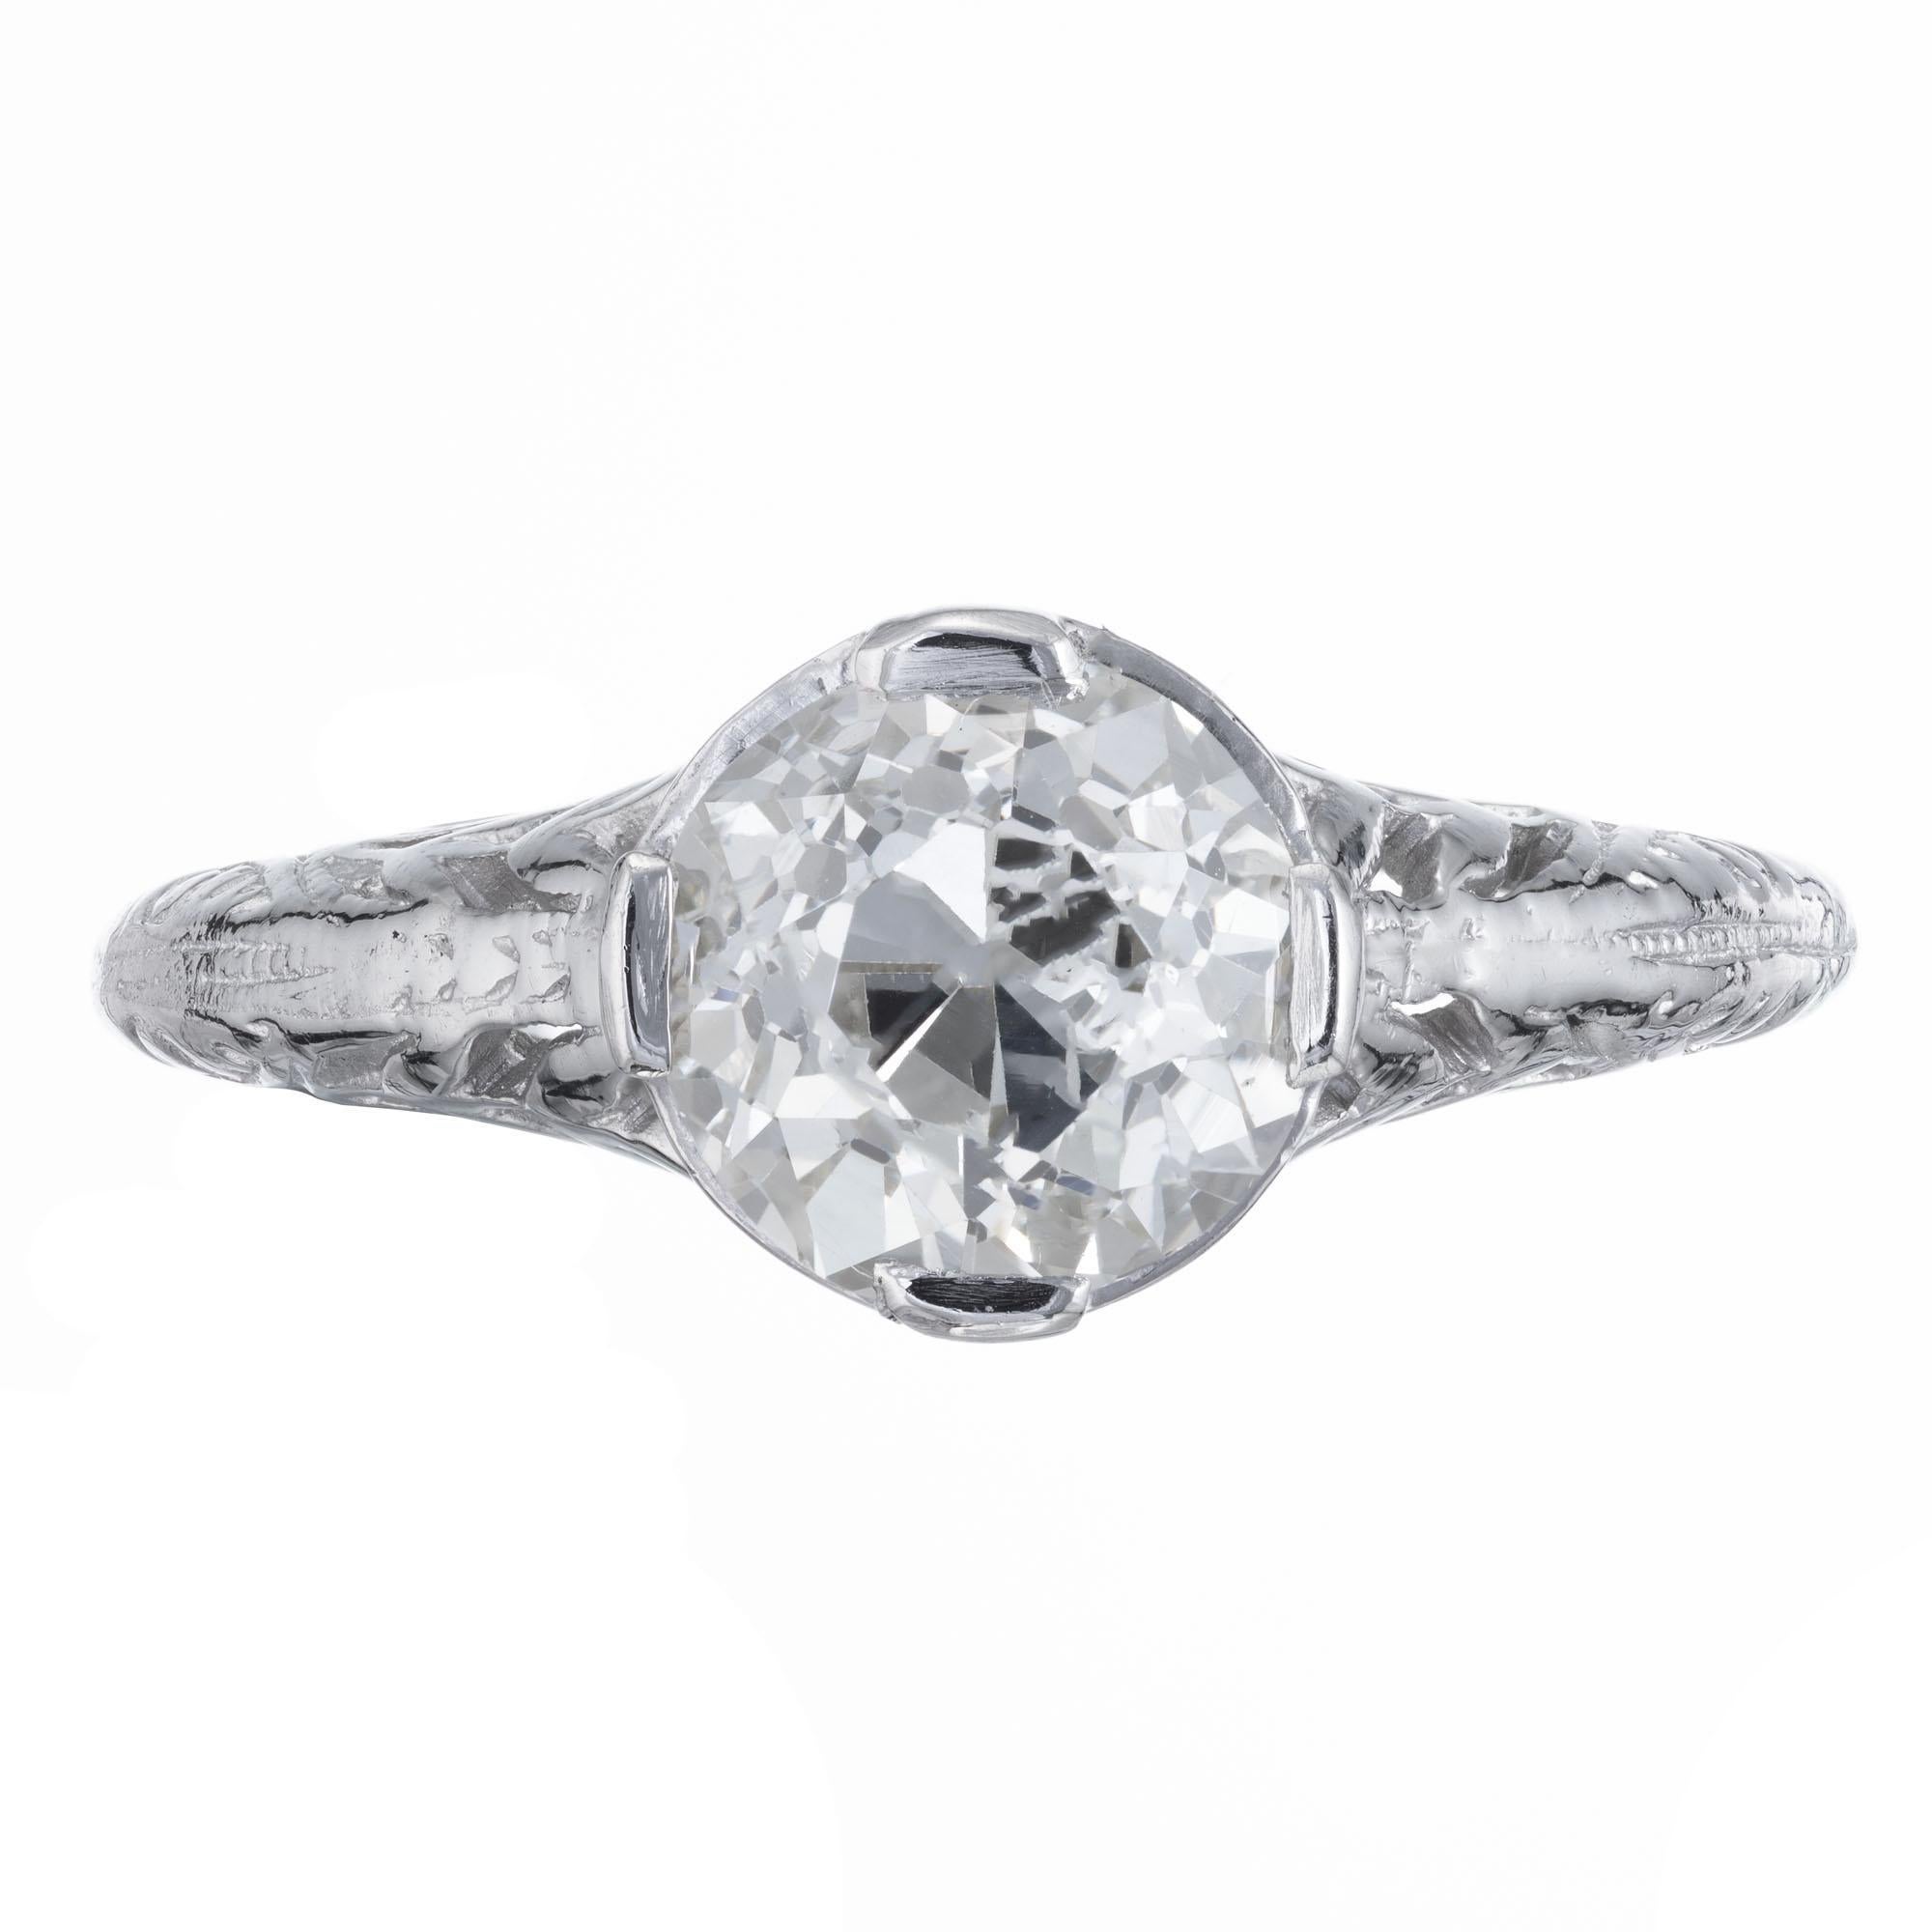 Art Nouveau diamond engagement ring. Handmade Platinum setting with an EGL certified old European cut center diamond.  ring circa 1900 with simple pierced design.   

1 old European cut diamond, approx. total weight 1.36cts, O to P color and VS1